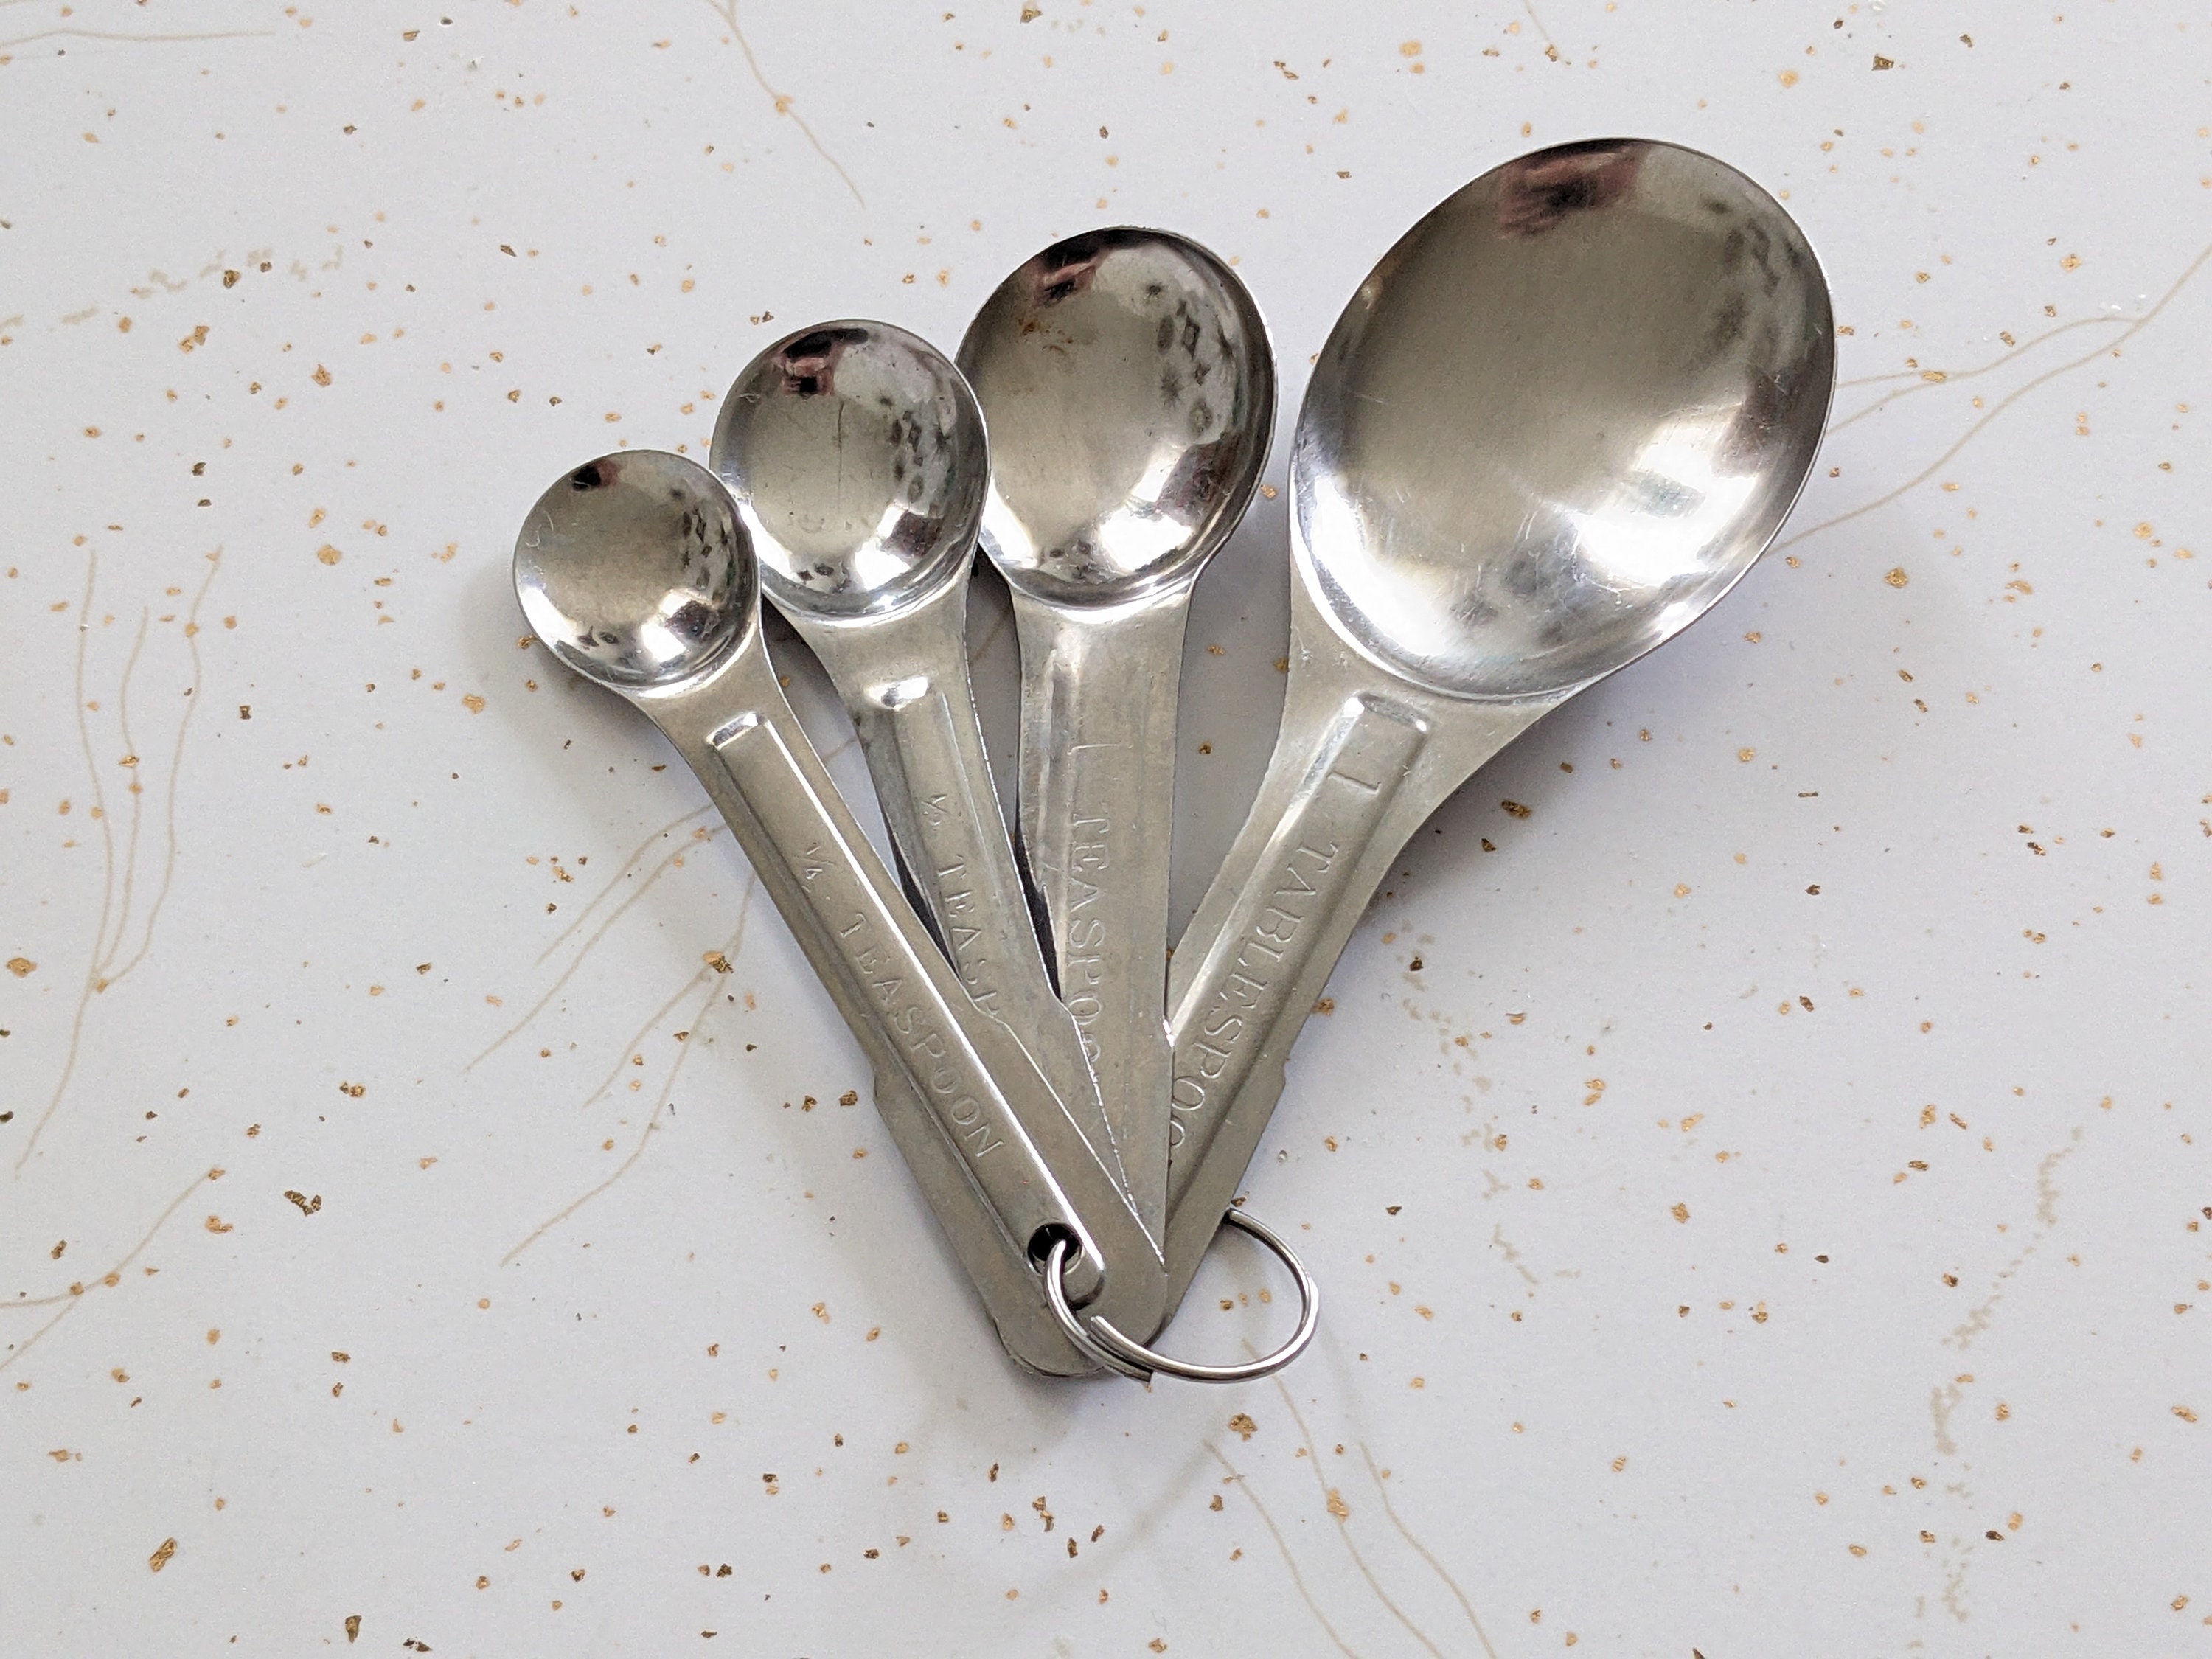 MAYFAIR Silver Stainless Steel Measuring Cup & Spoon Set Set of 9